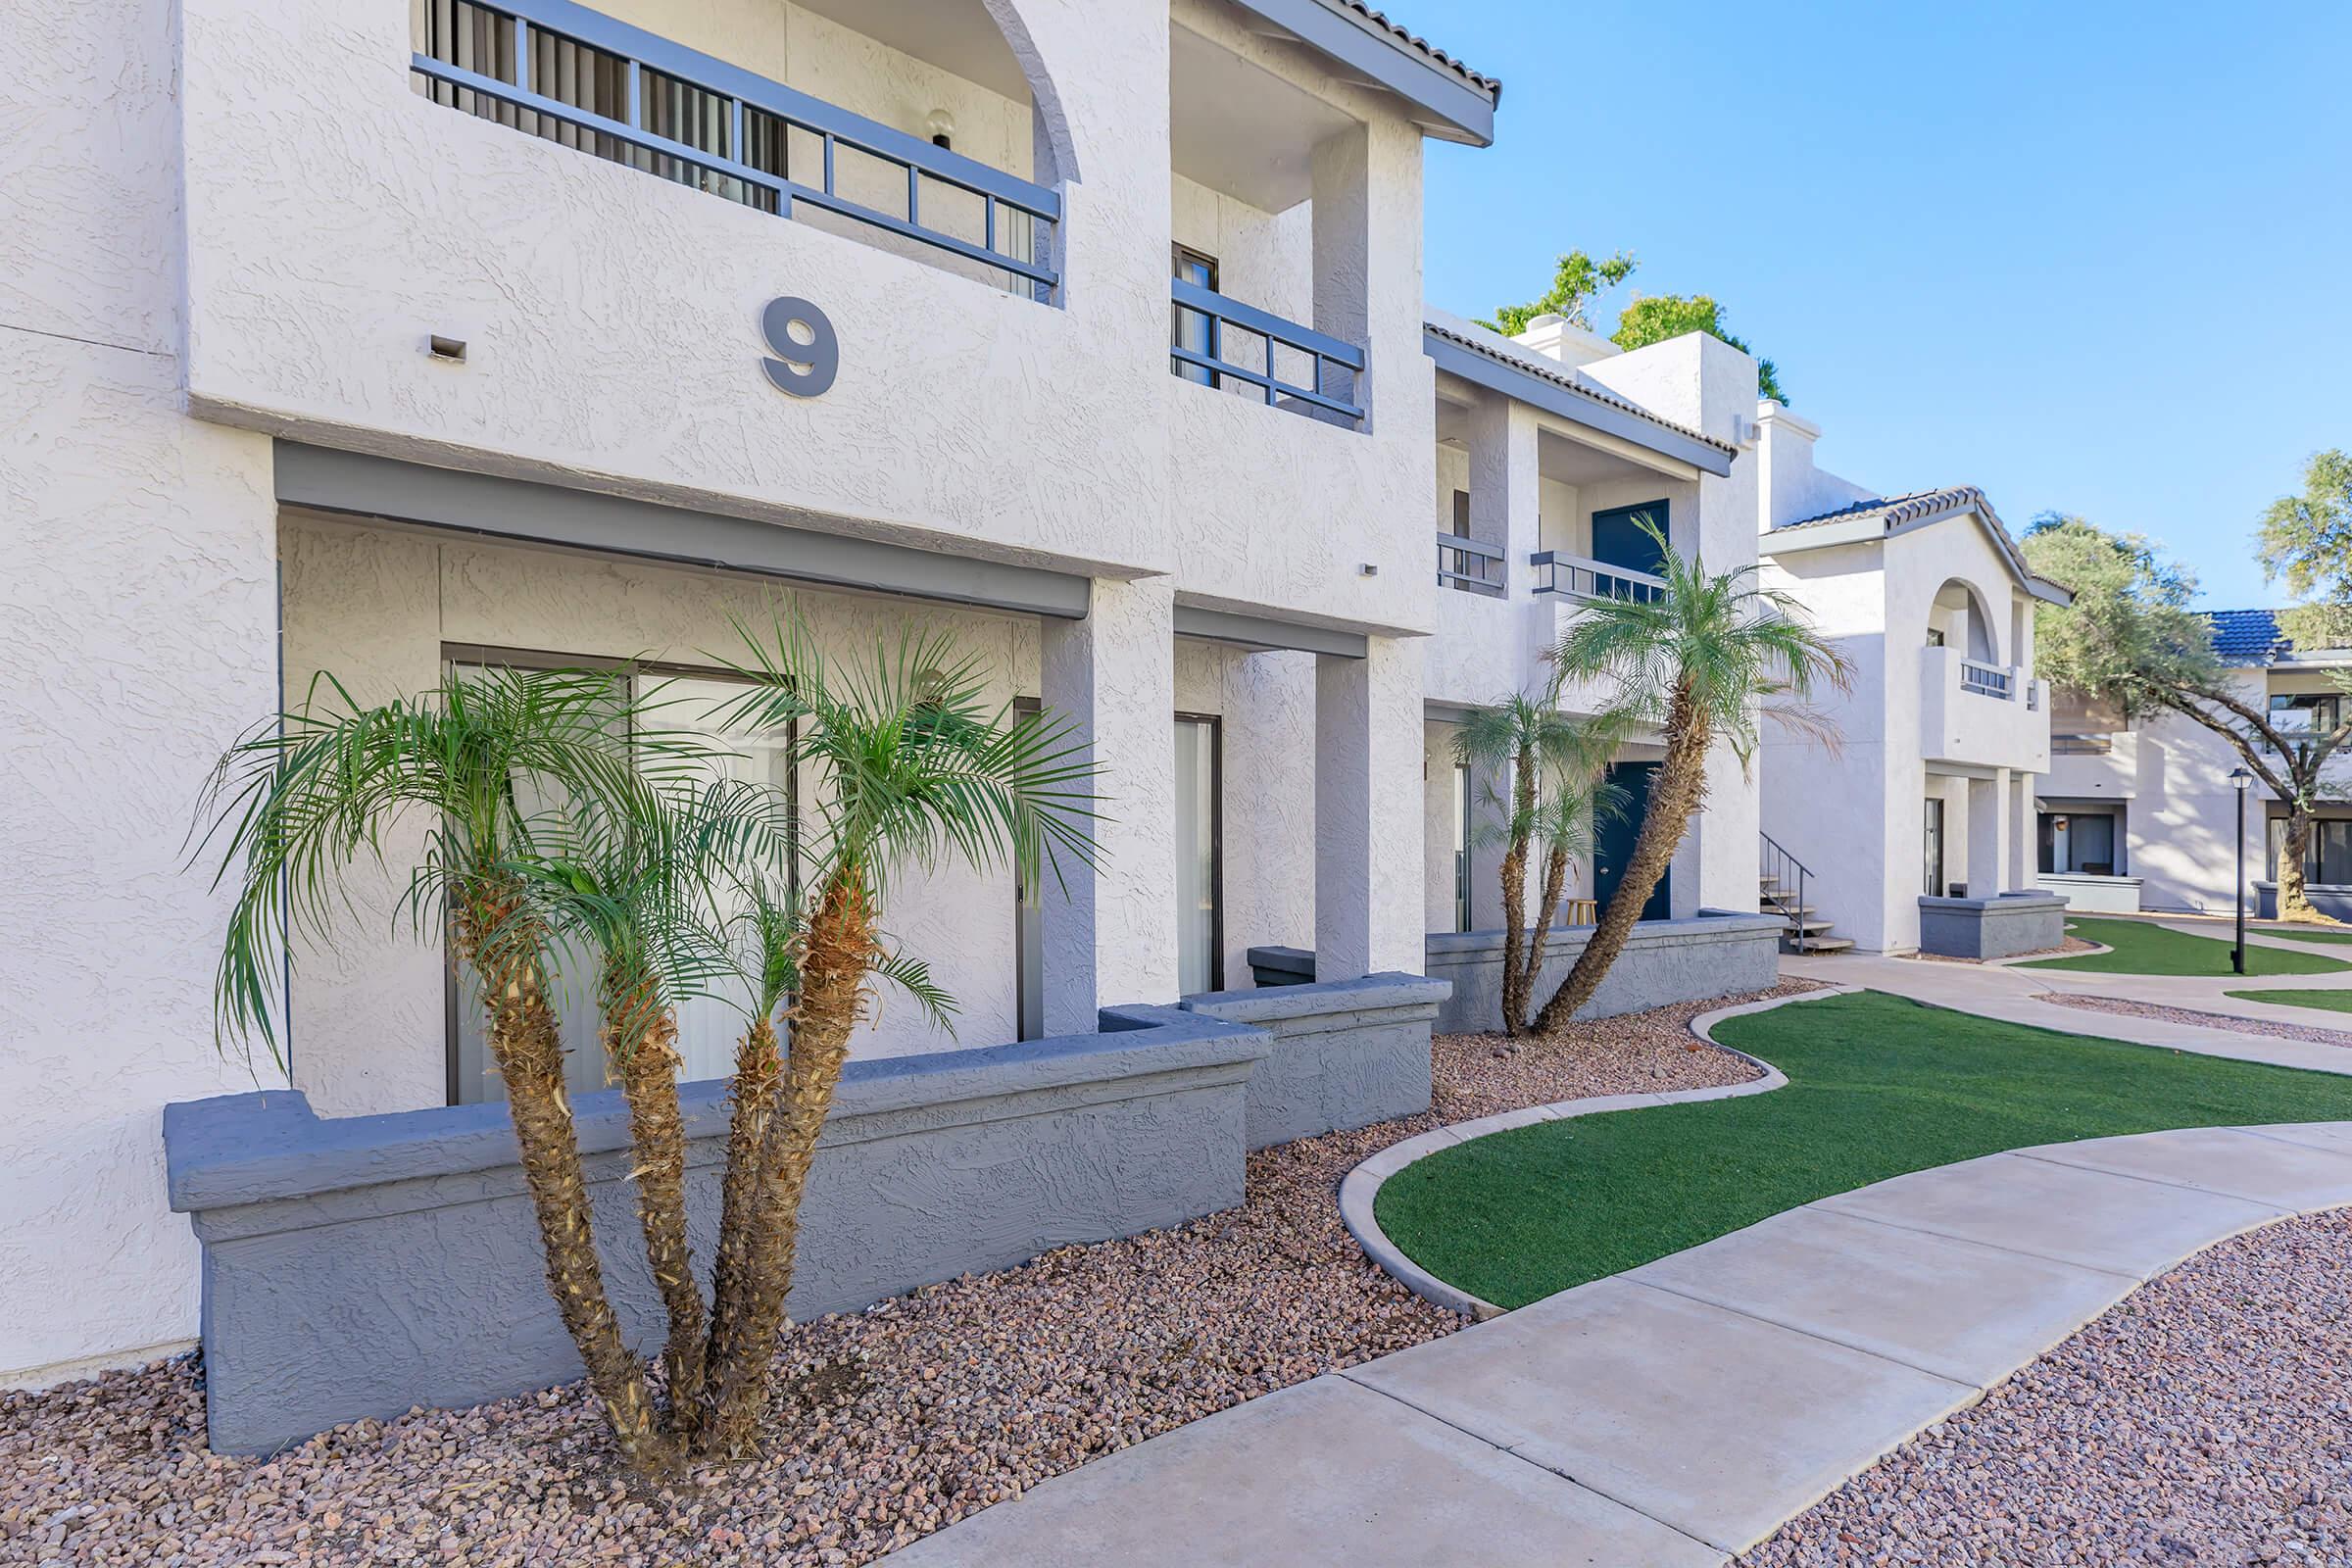 Outdoor walkway with palm trees next to the Rise on Cactus Phoenix, AZ apartments